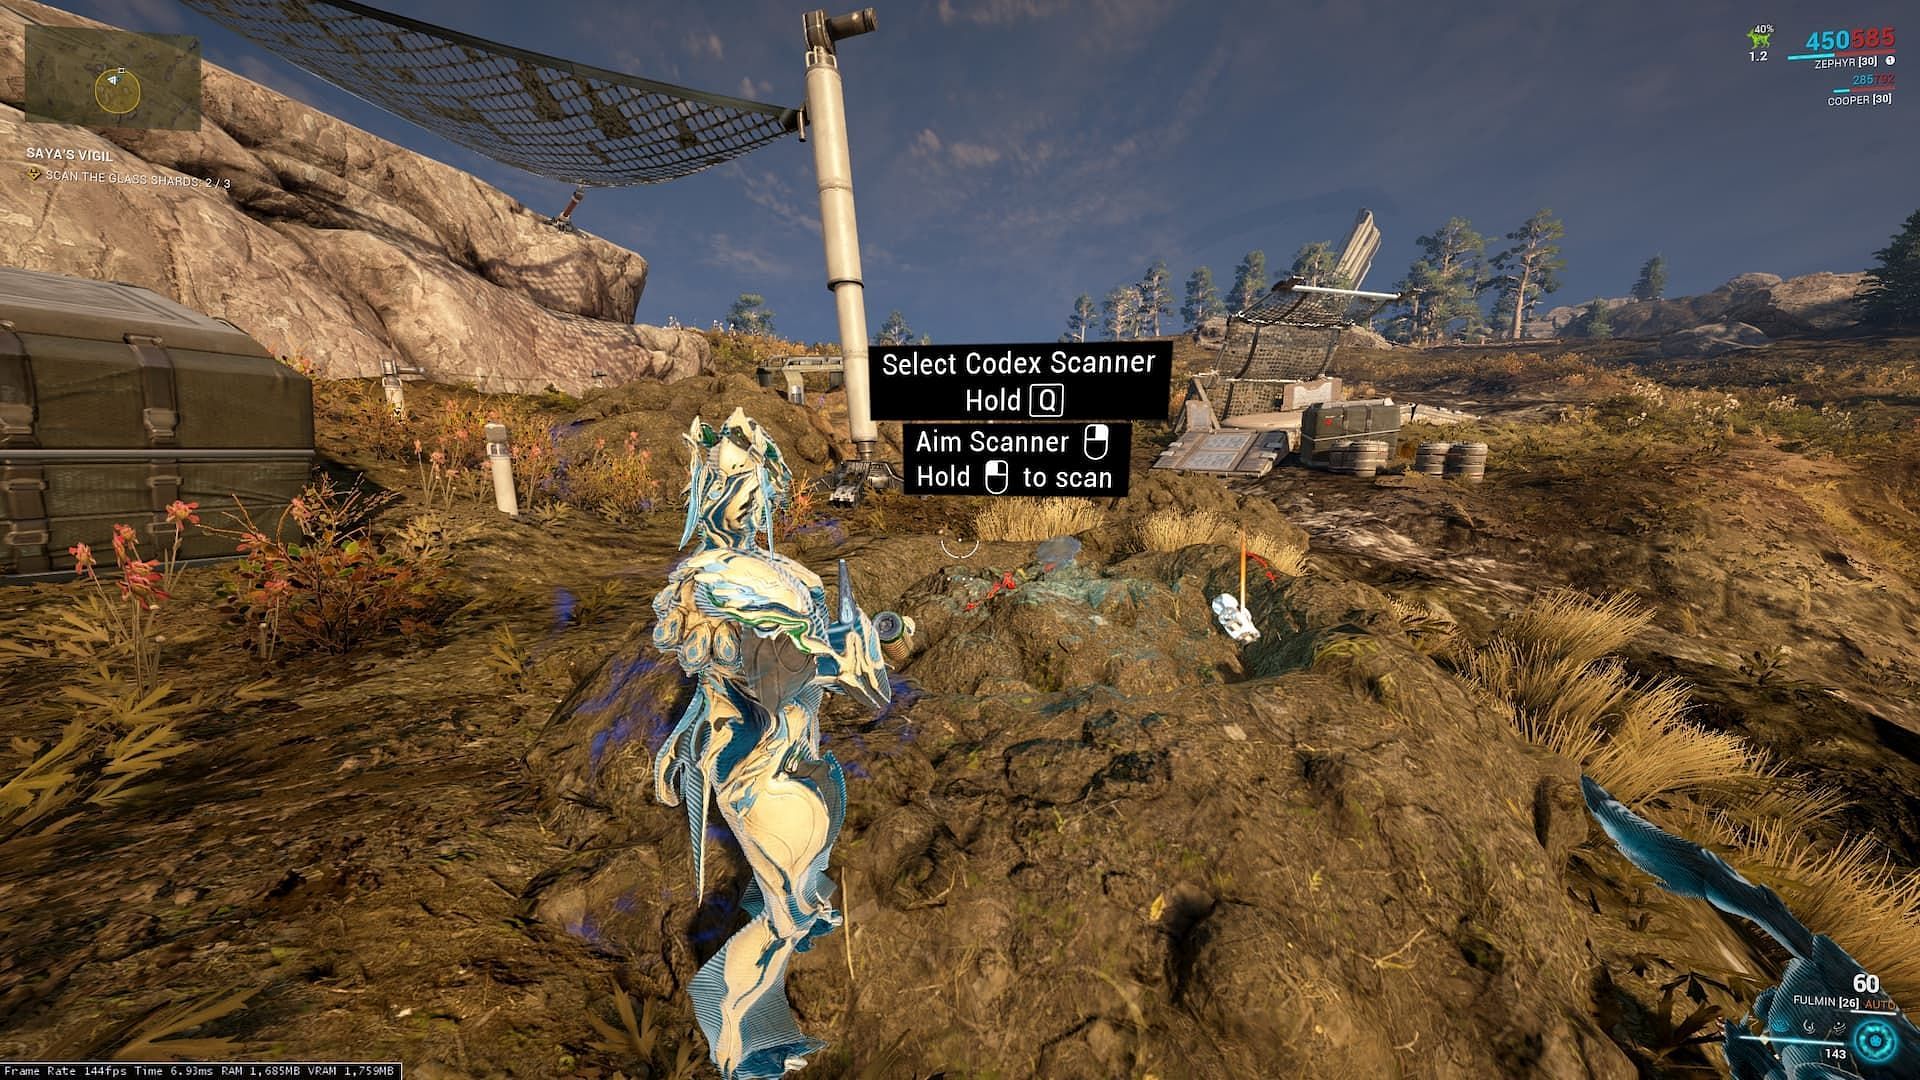 Gara&#039;s main blueprint is the reward for completing the Saya&#039;s Vigil quest in Cetus (Image via Digital Extremes)